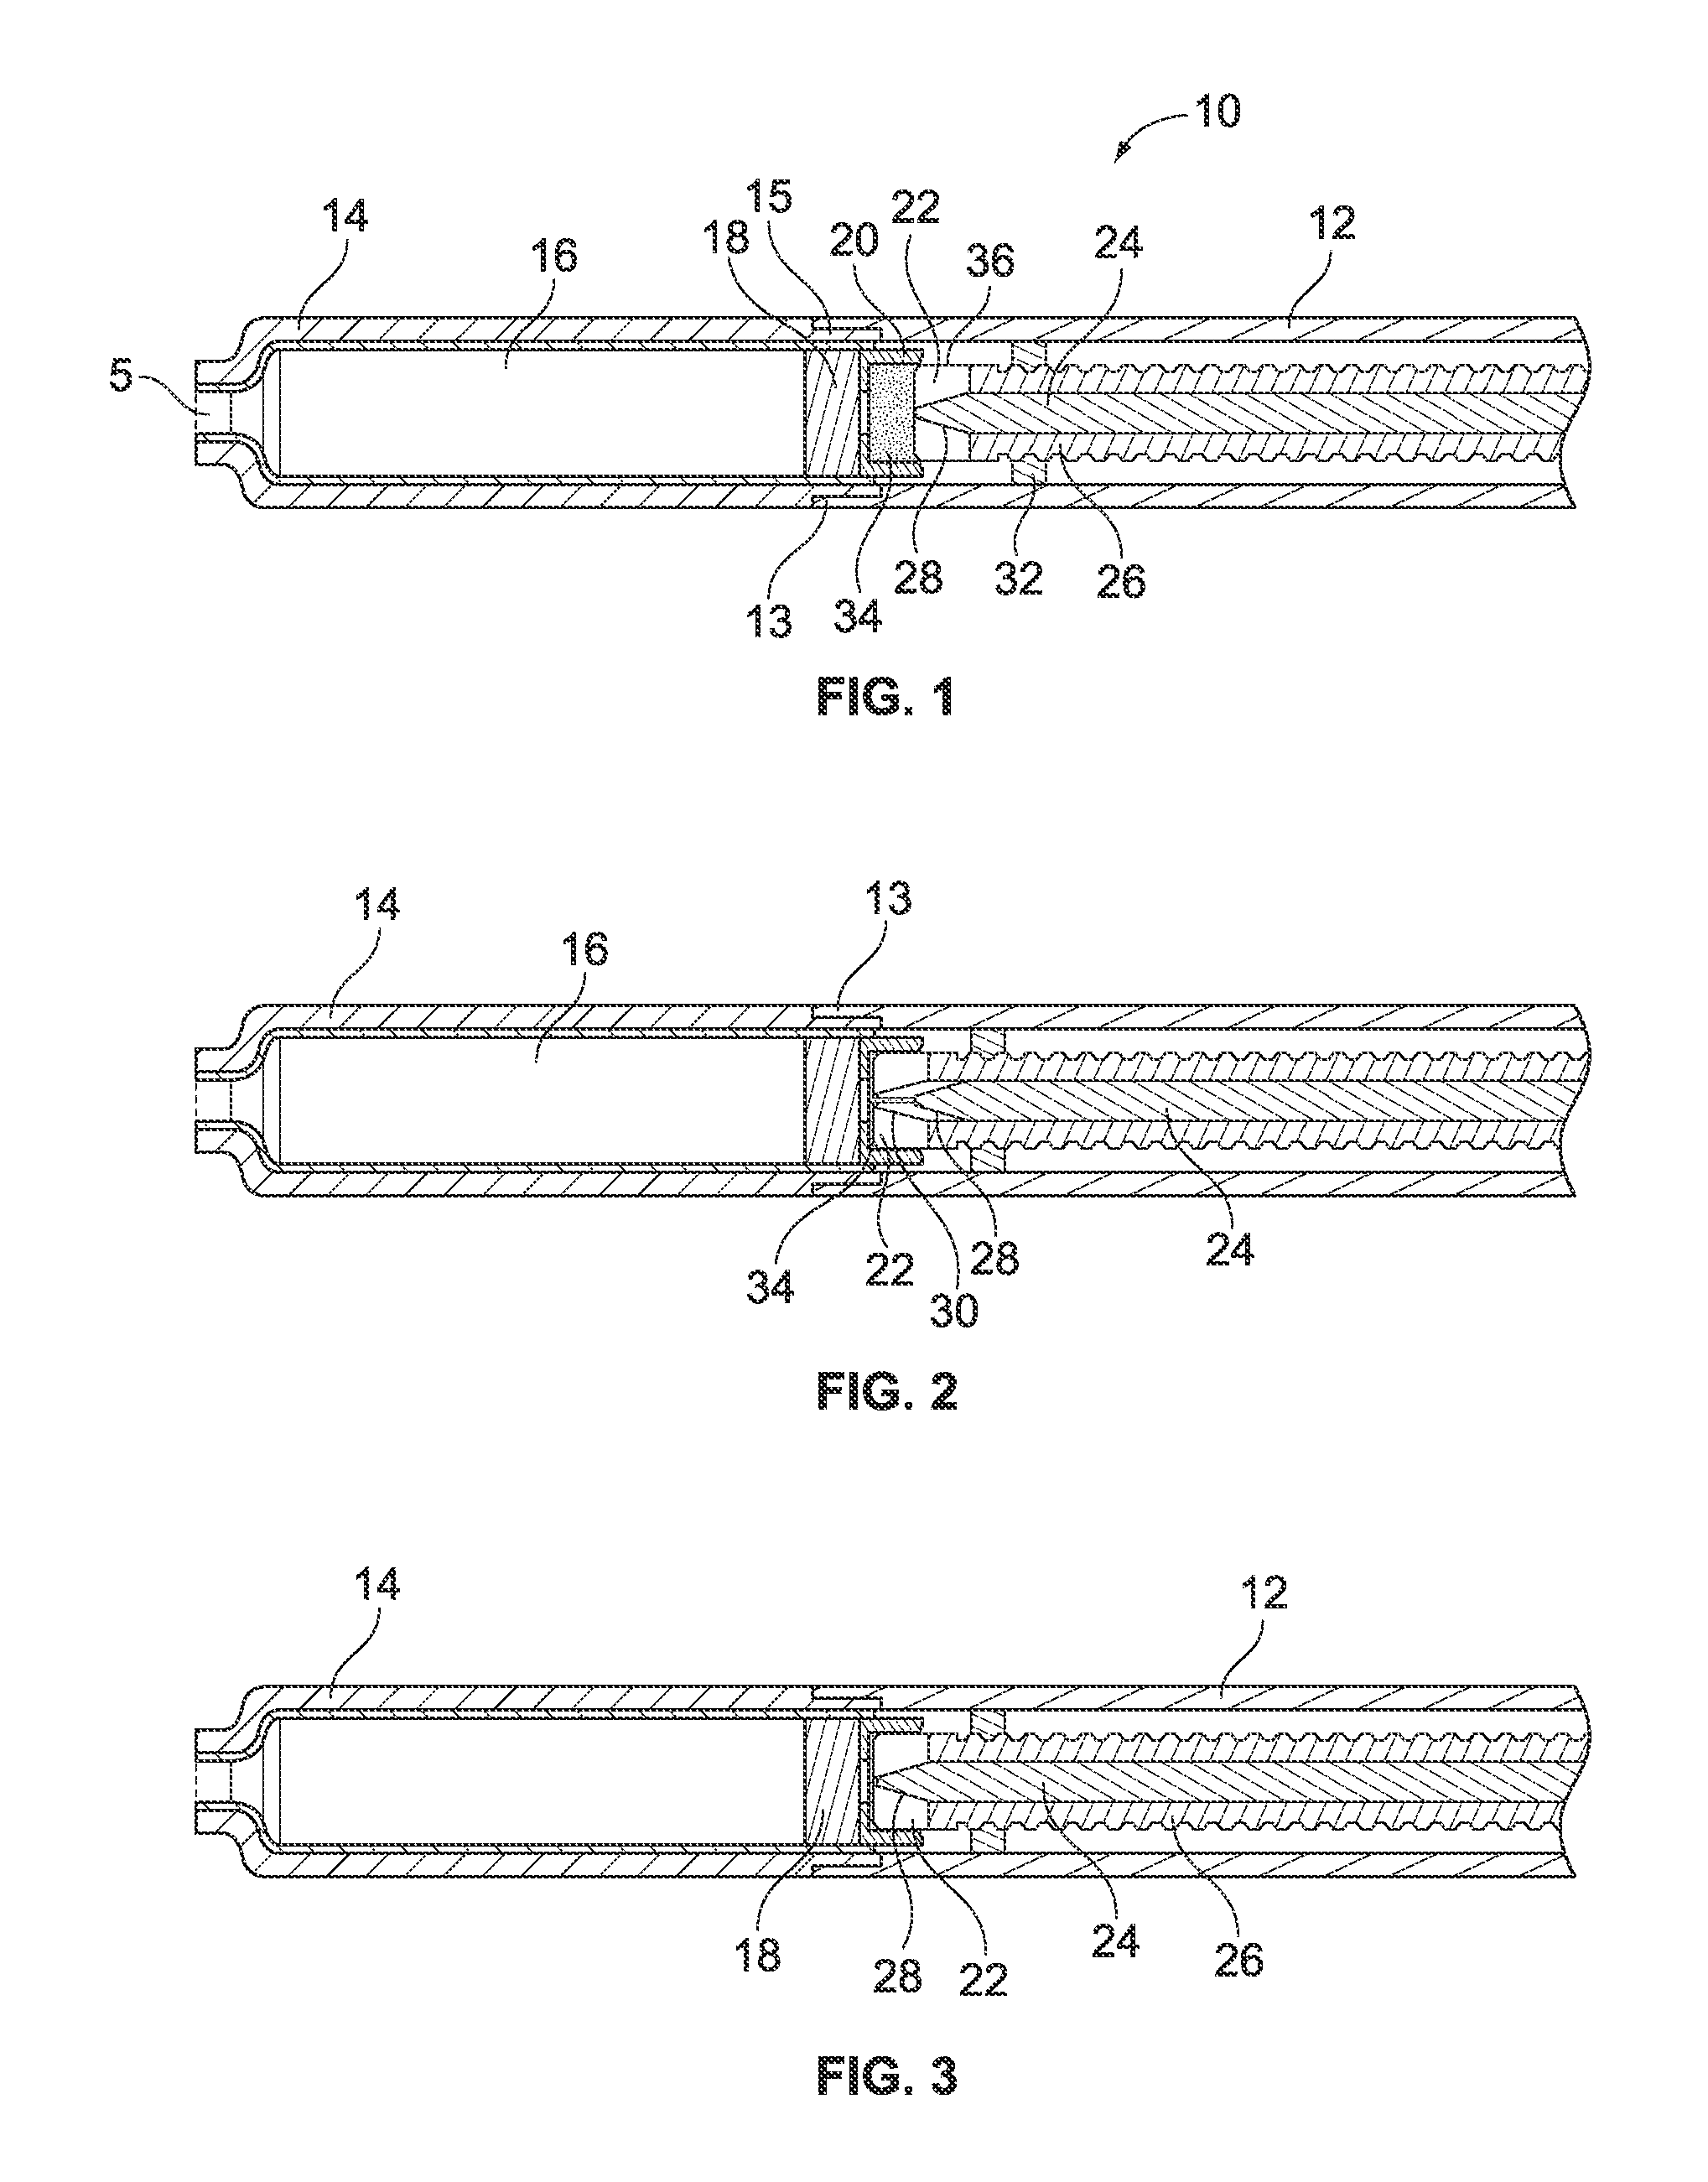 Drug delivery device for delivery of a medicament